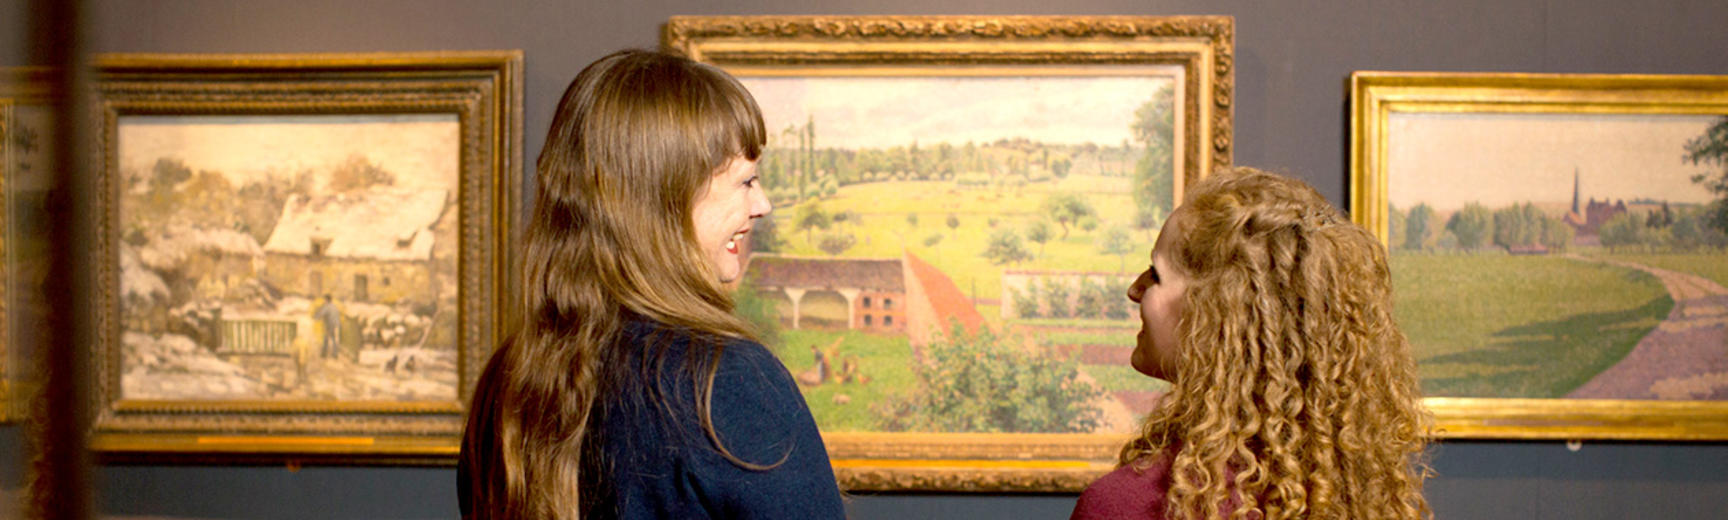 Two women looking at a Pissarro painting